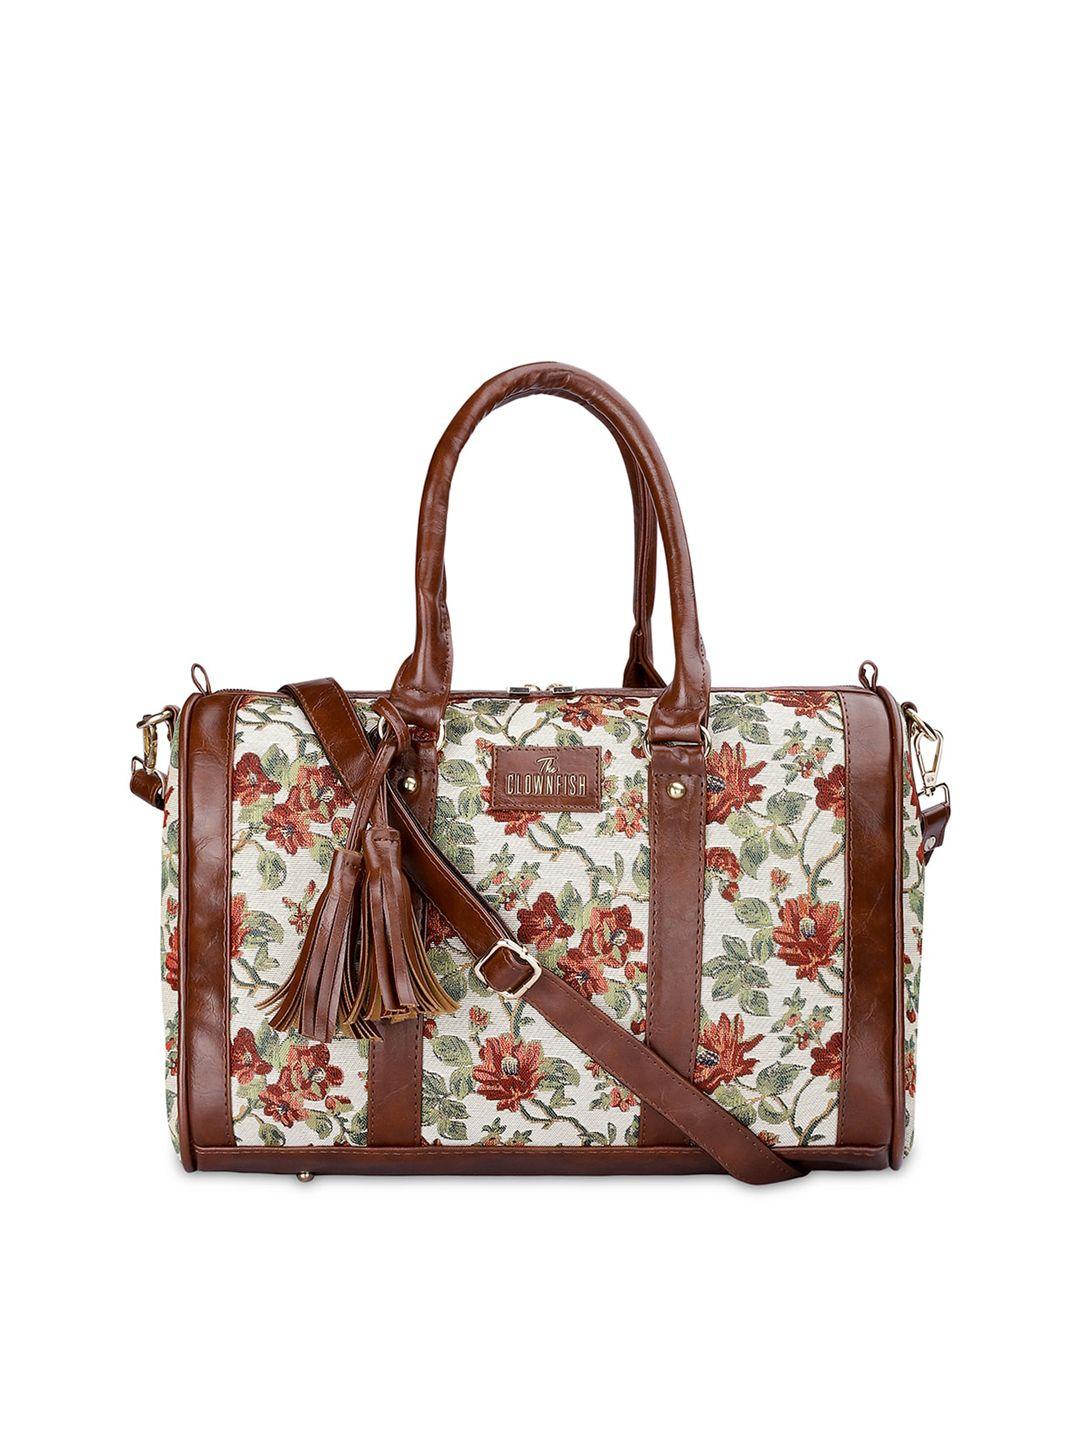 the-clownfish-floral-printed-oversized-structured-handheld-bag-with-tasselled